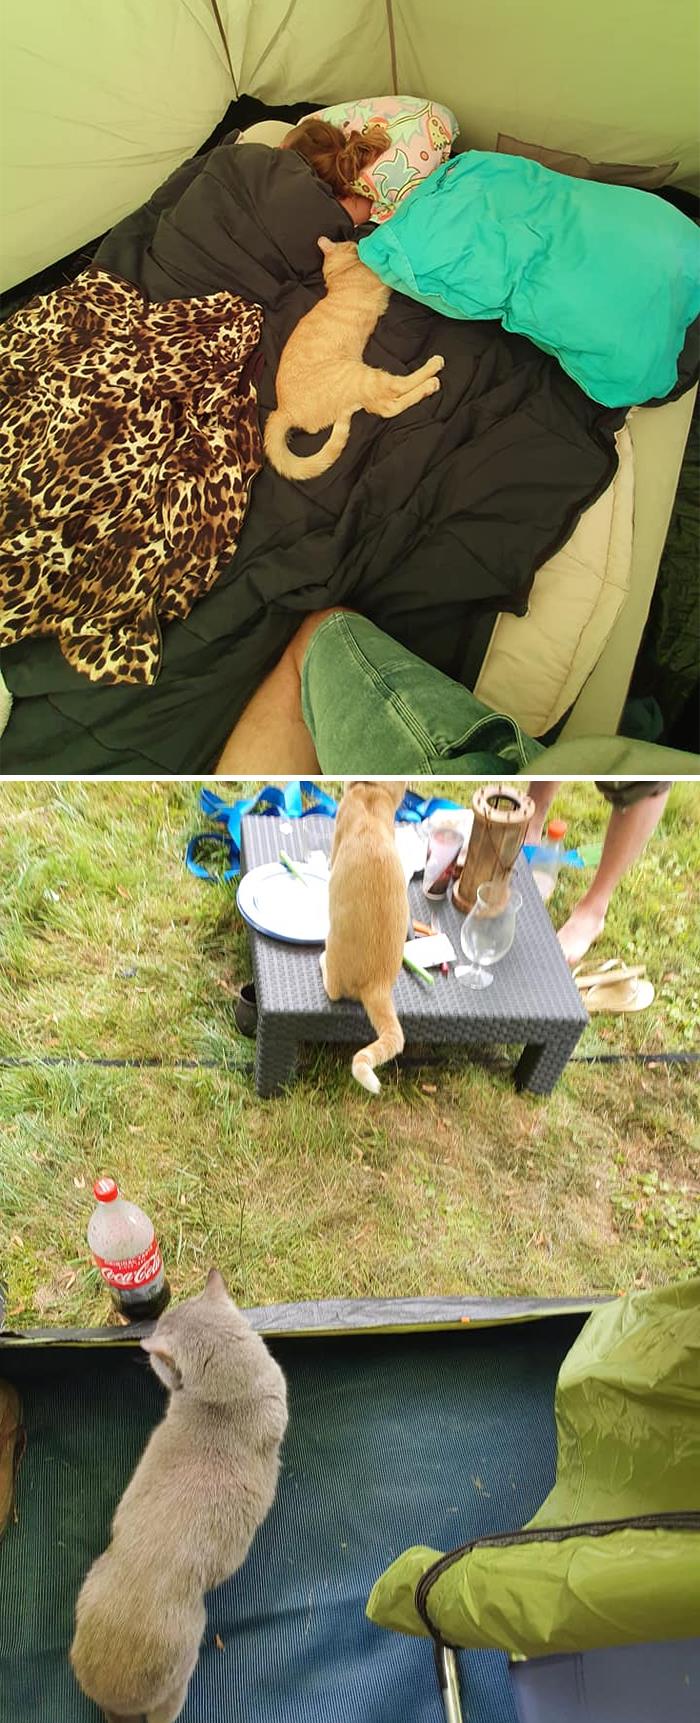 Our Tent And Bed, Not Our Cats. I Woke Up With His Legs Under Me.